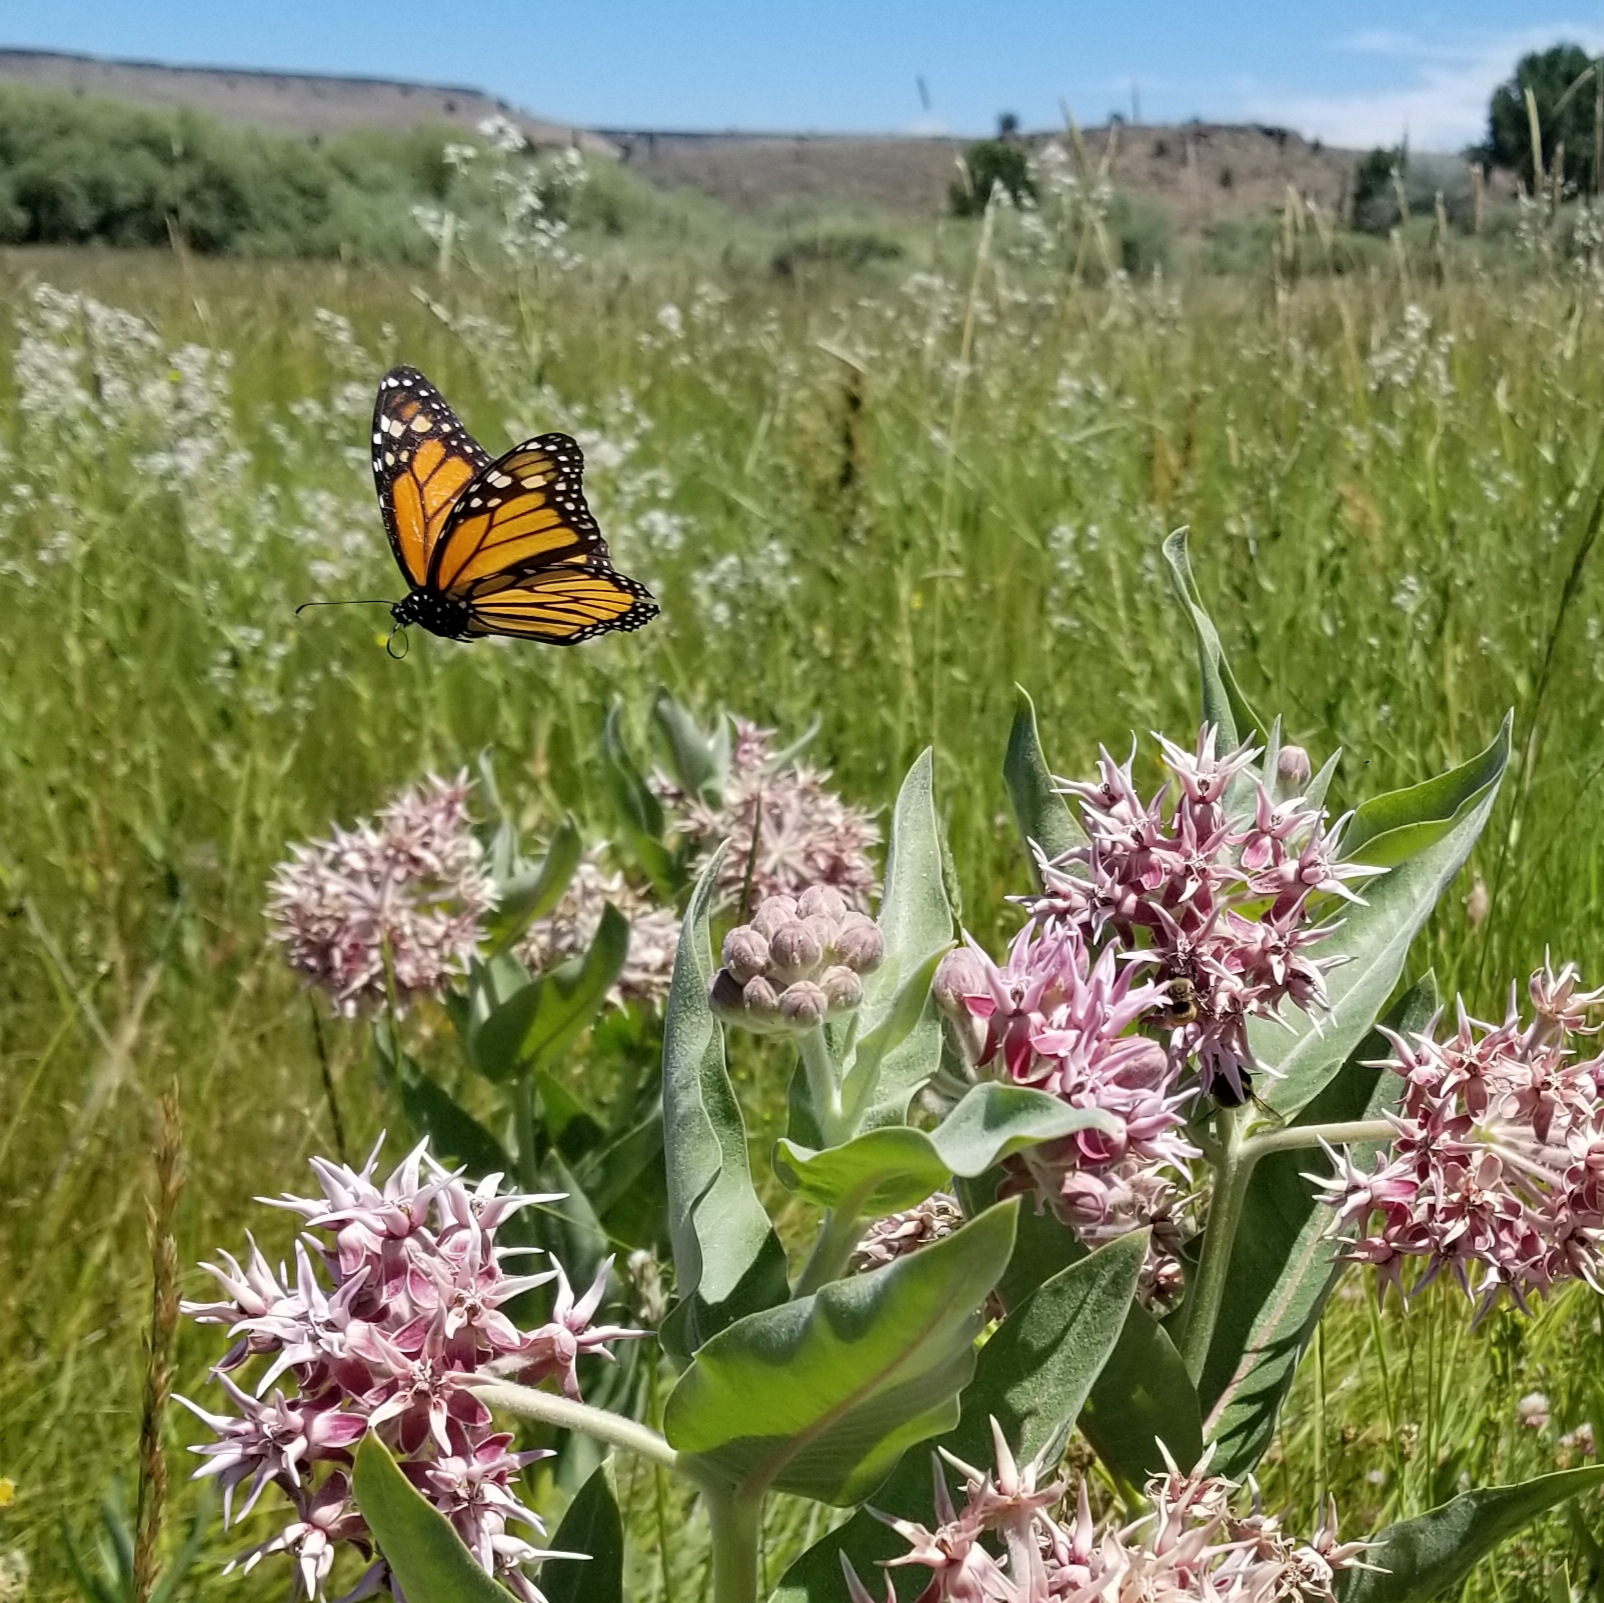 A monarch butterfly flies over a pale pink flower